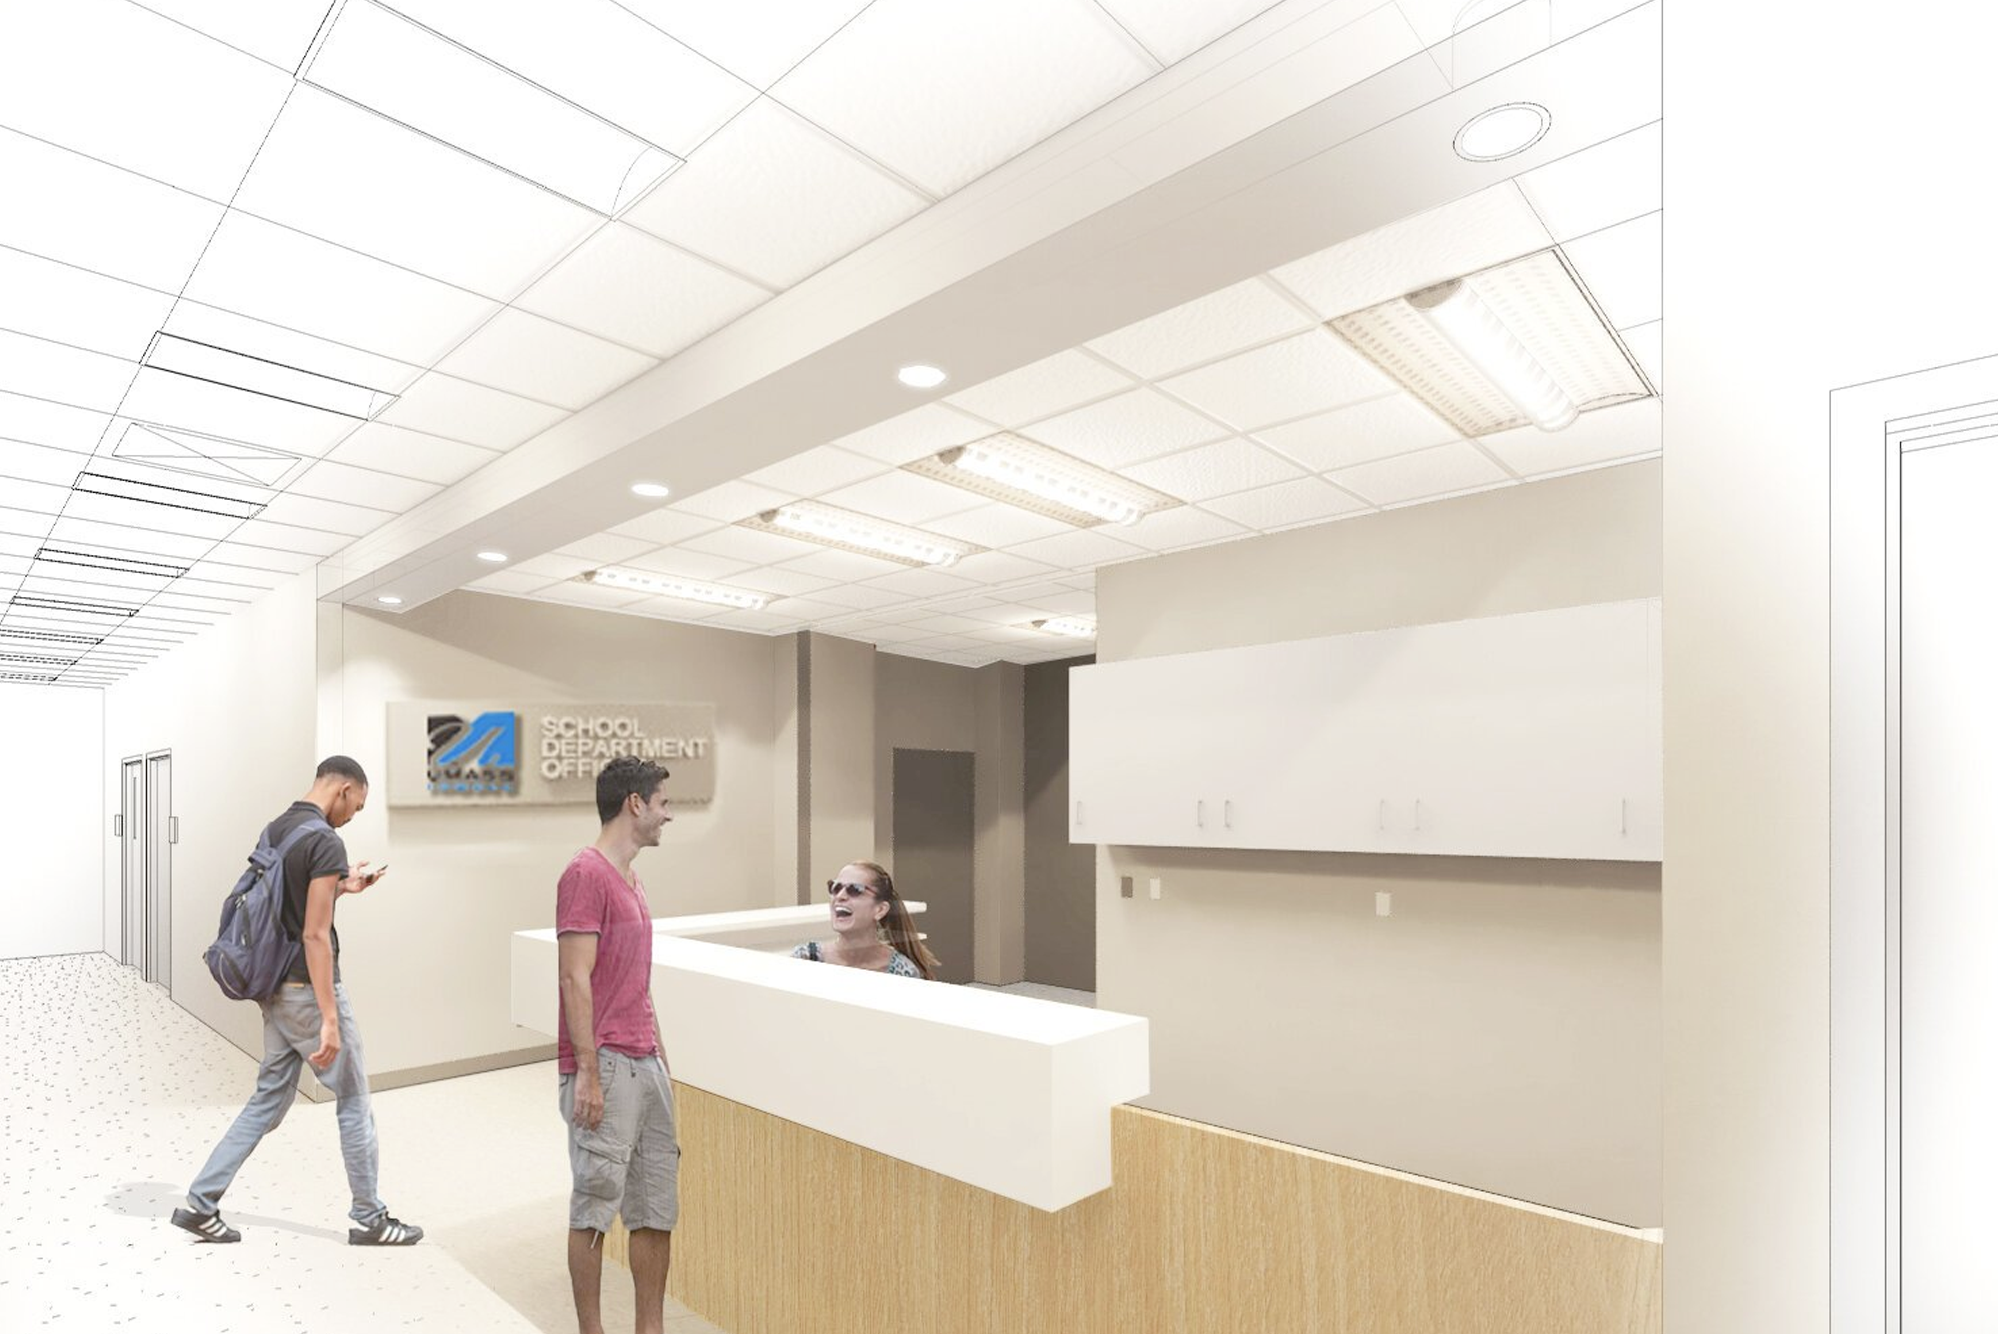 Interior rendering, Faculty Offices Health Sciences Departments at UMass Lowell, people occupy the space